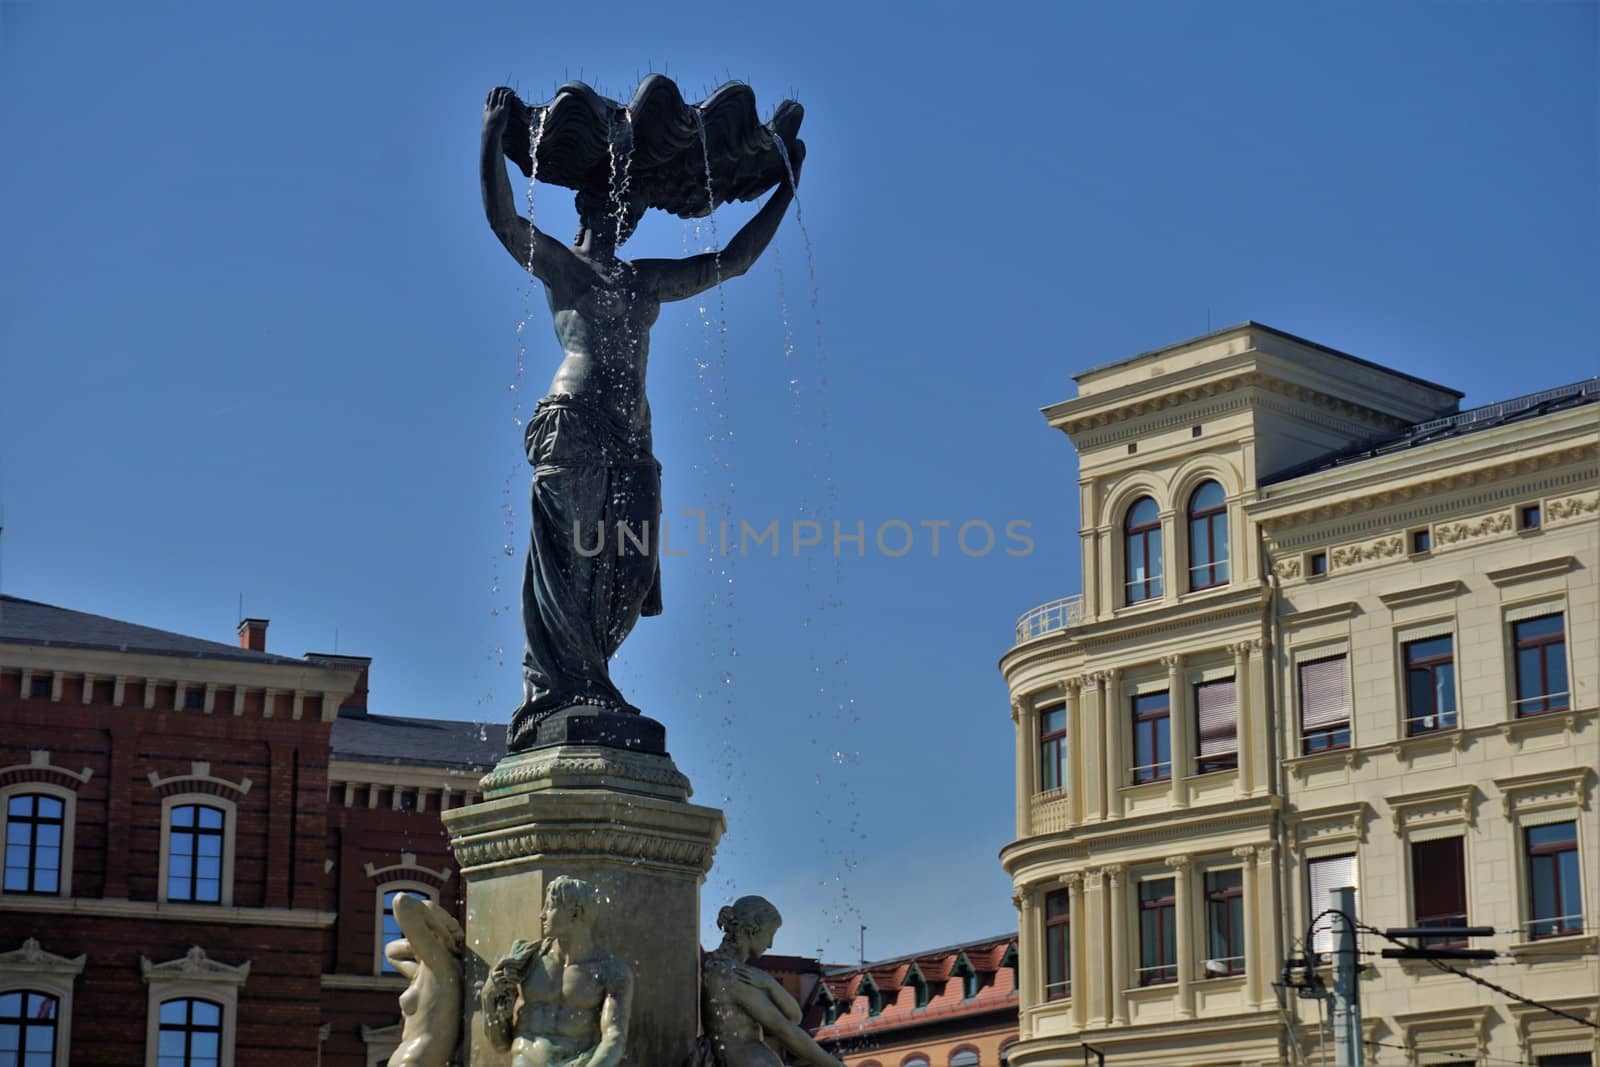 Clam maid fountain on the Post Square in the city of Goerlitz by pisces2386